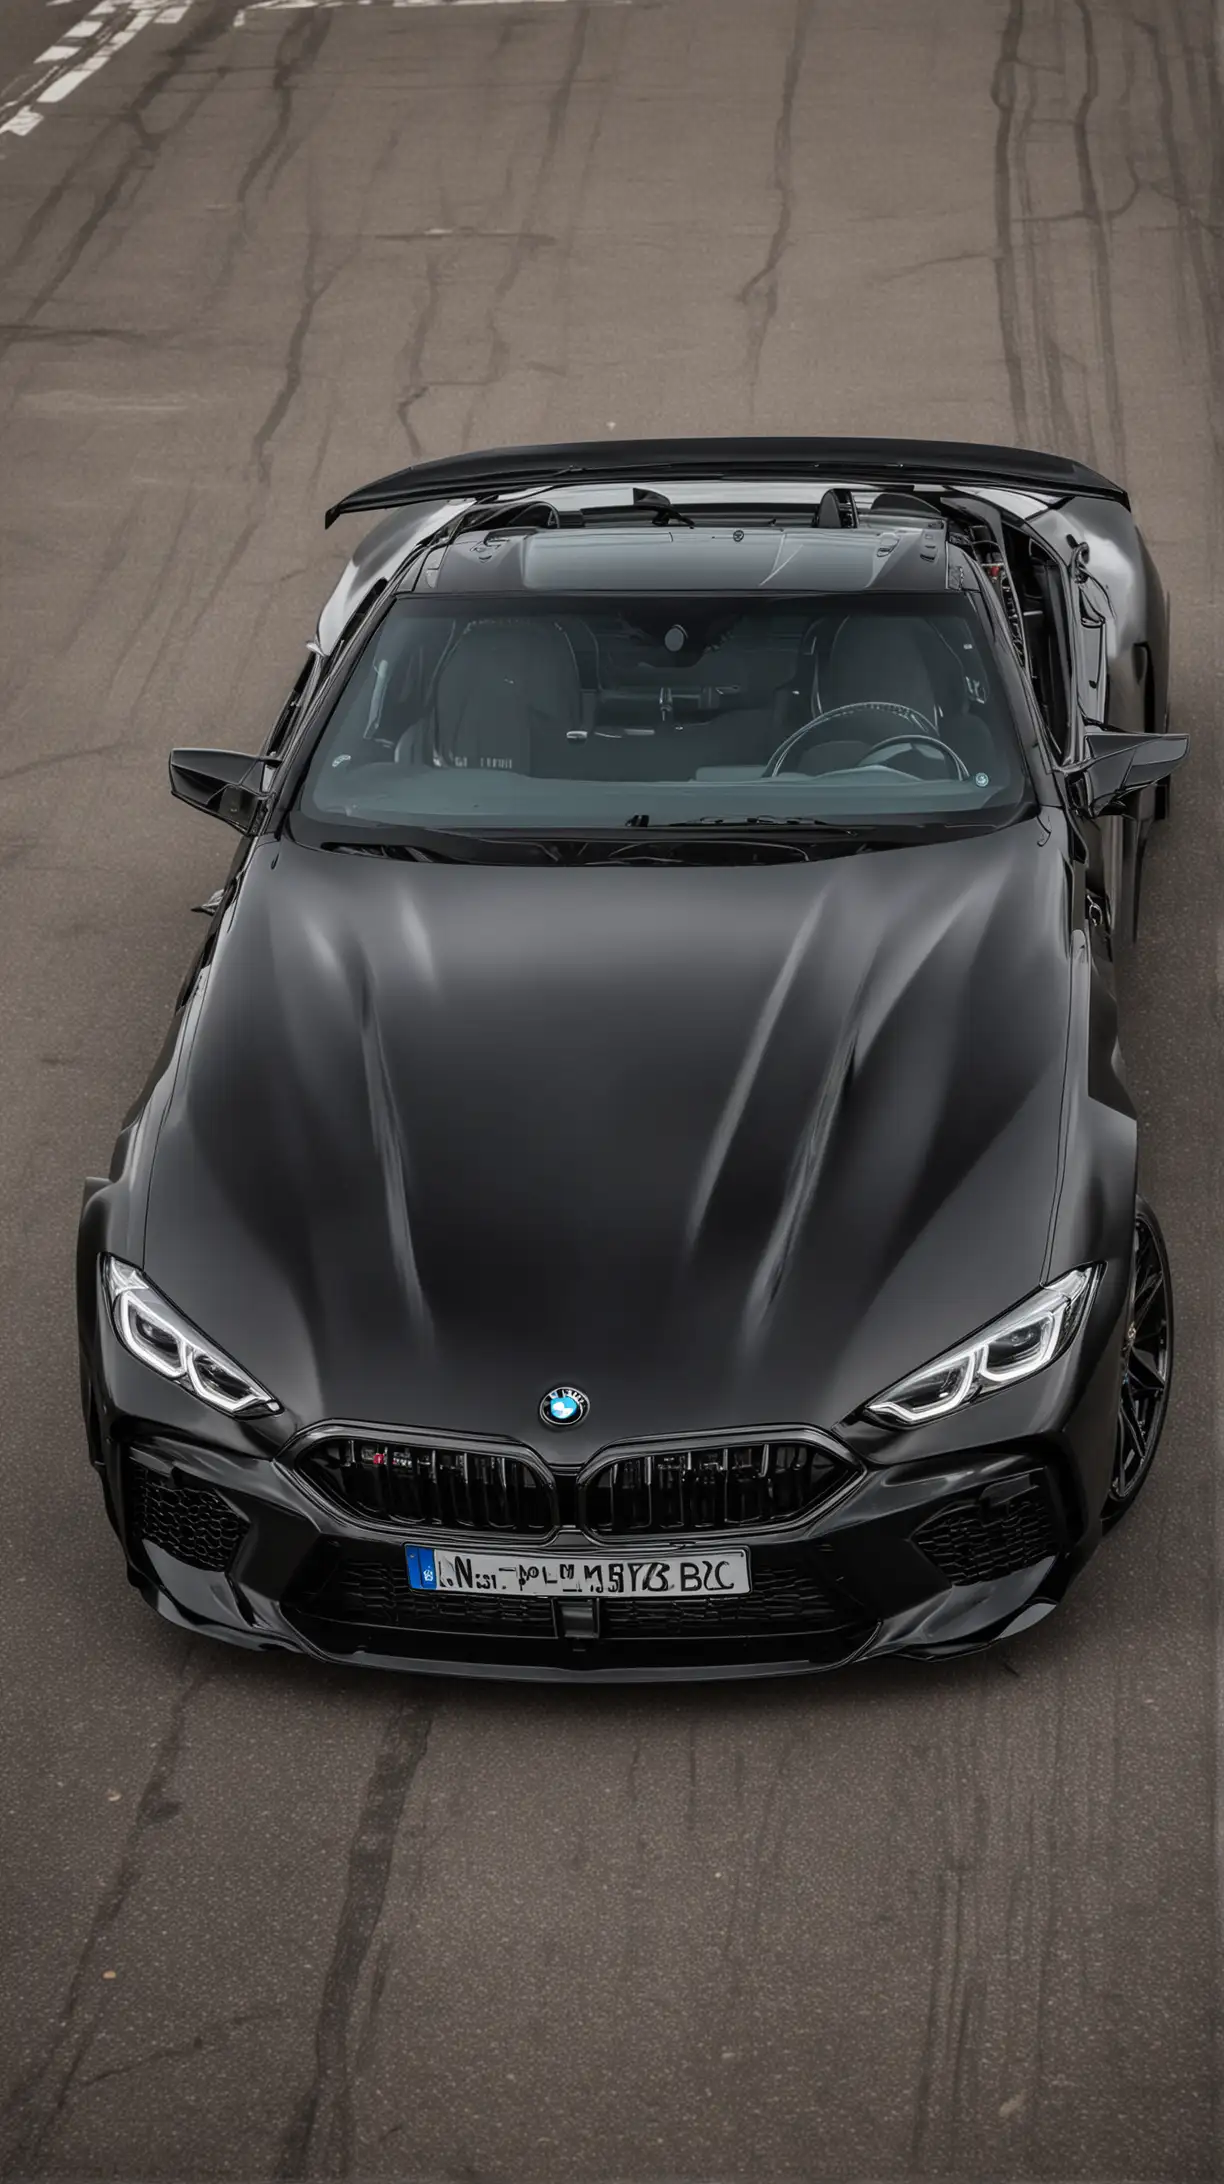 Luxury Black BMW M8 Front View Car Photography